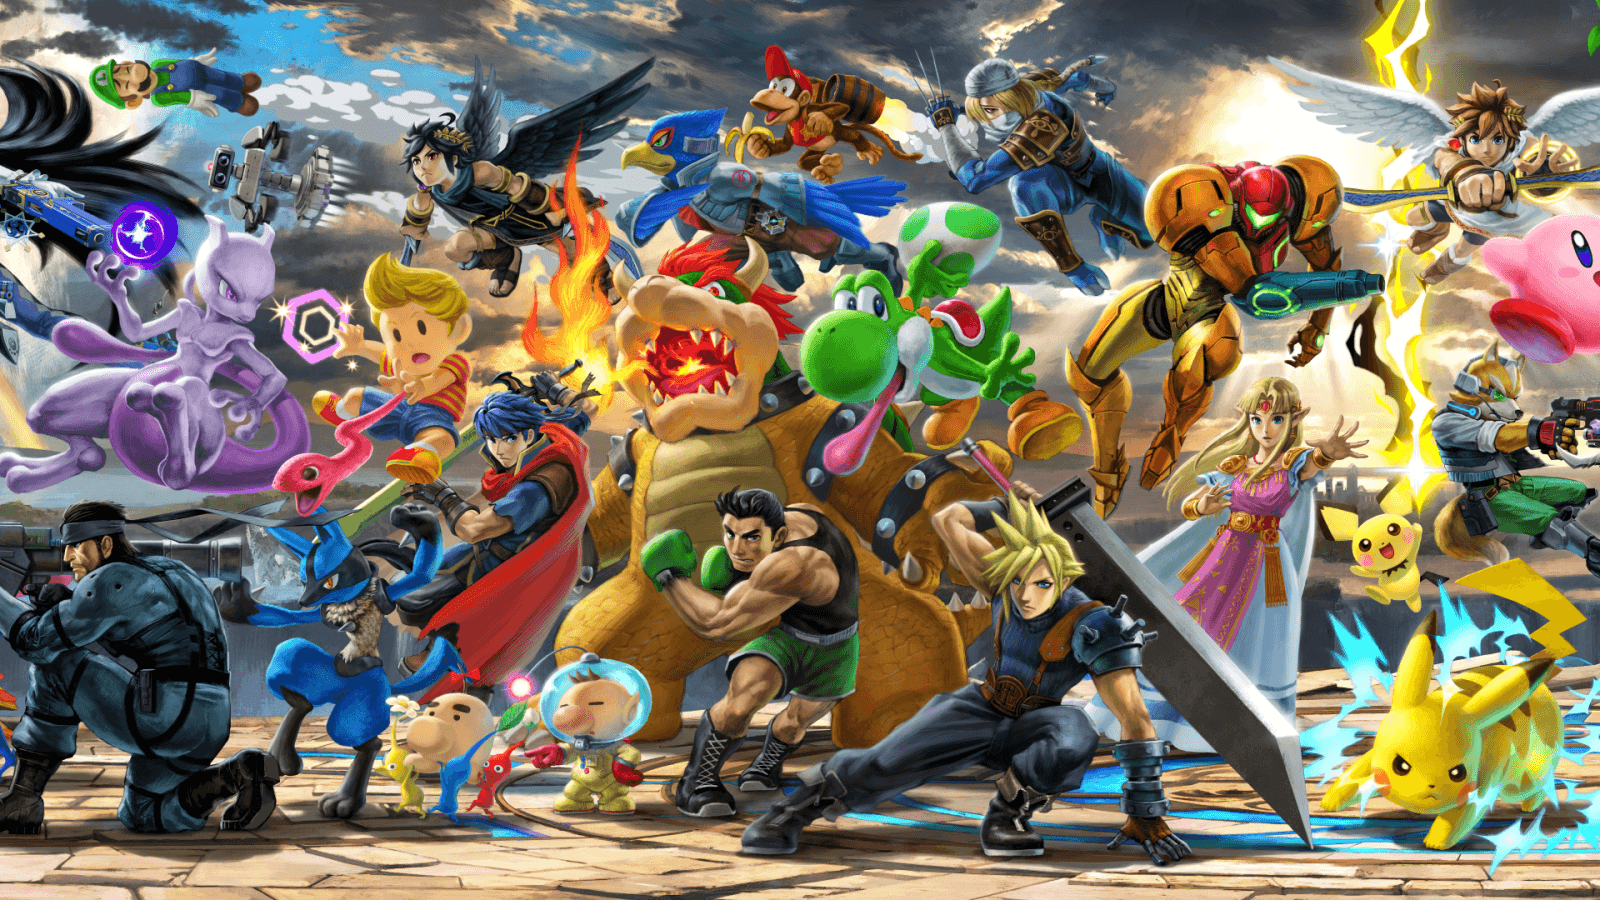 With Its Massive Cast, Super Smash Bros. Ultimate Desperately Needs